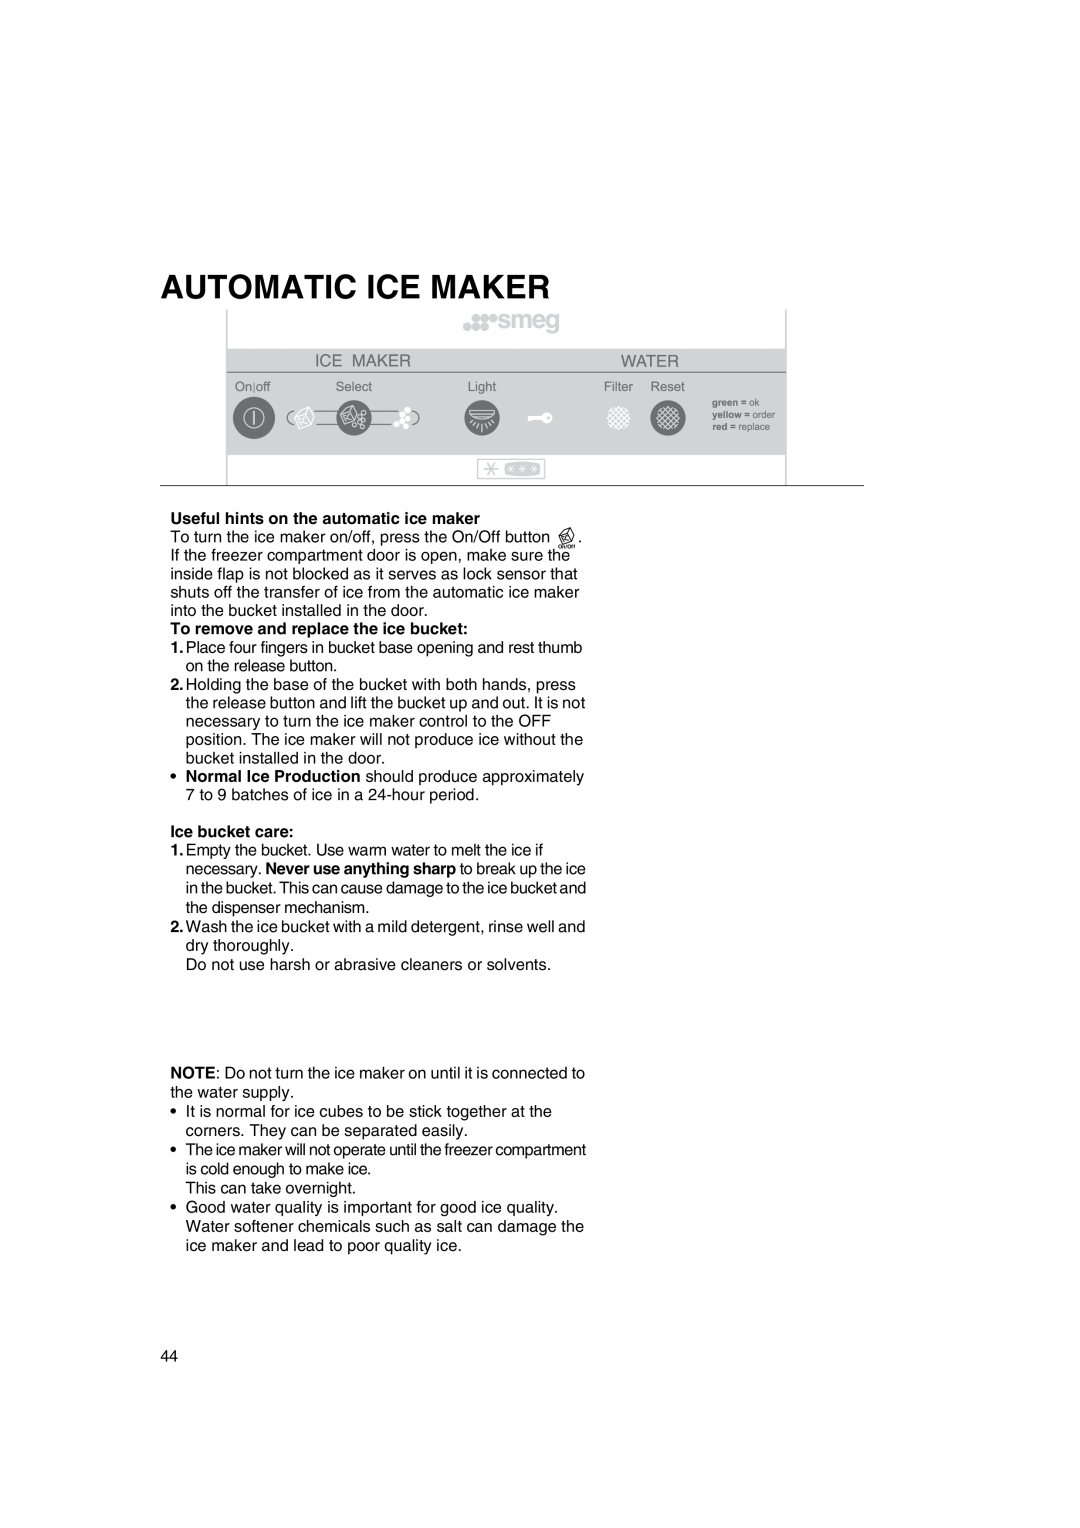 Smeg FA550XBI manual Automatic Ice Maker, Useful hints on the automatic ice maker, To remove and replace the ice bucket 